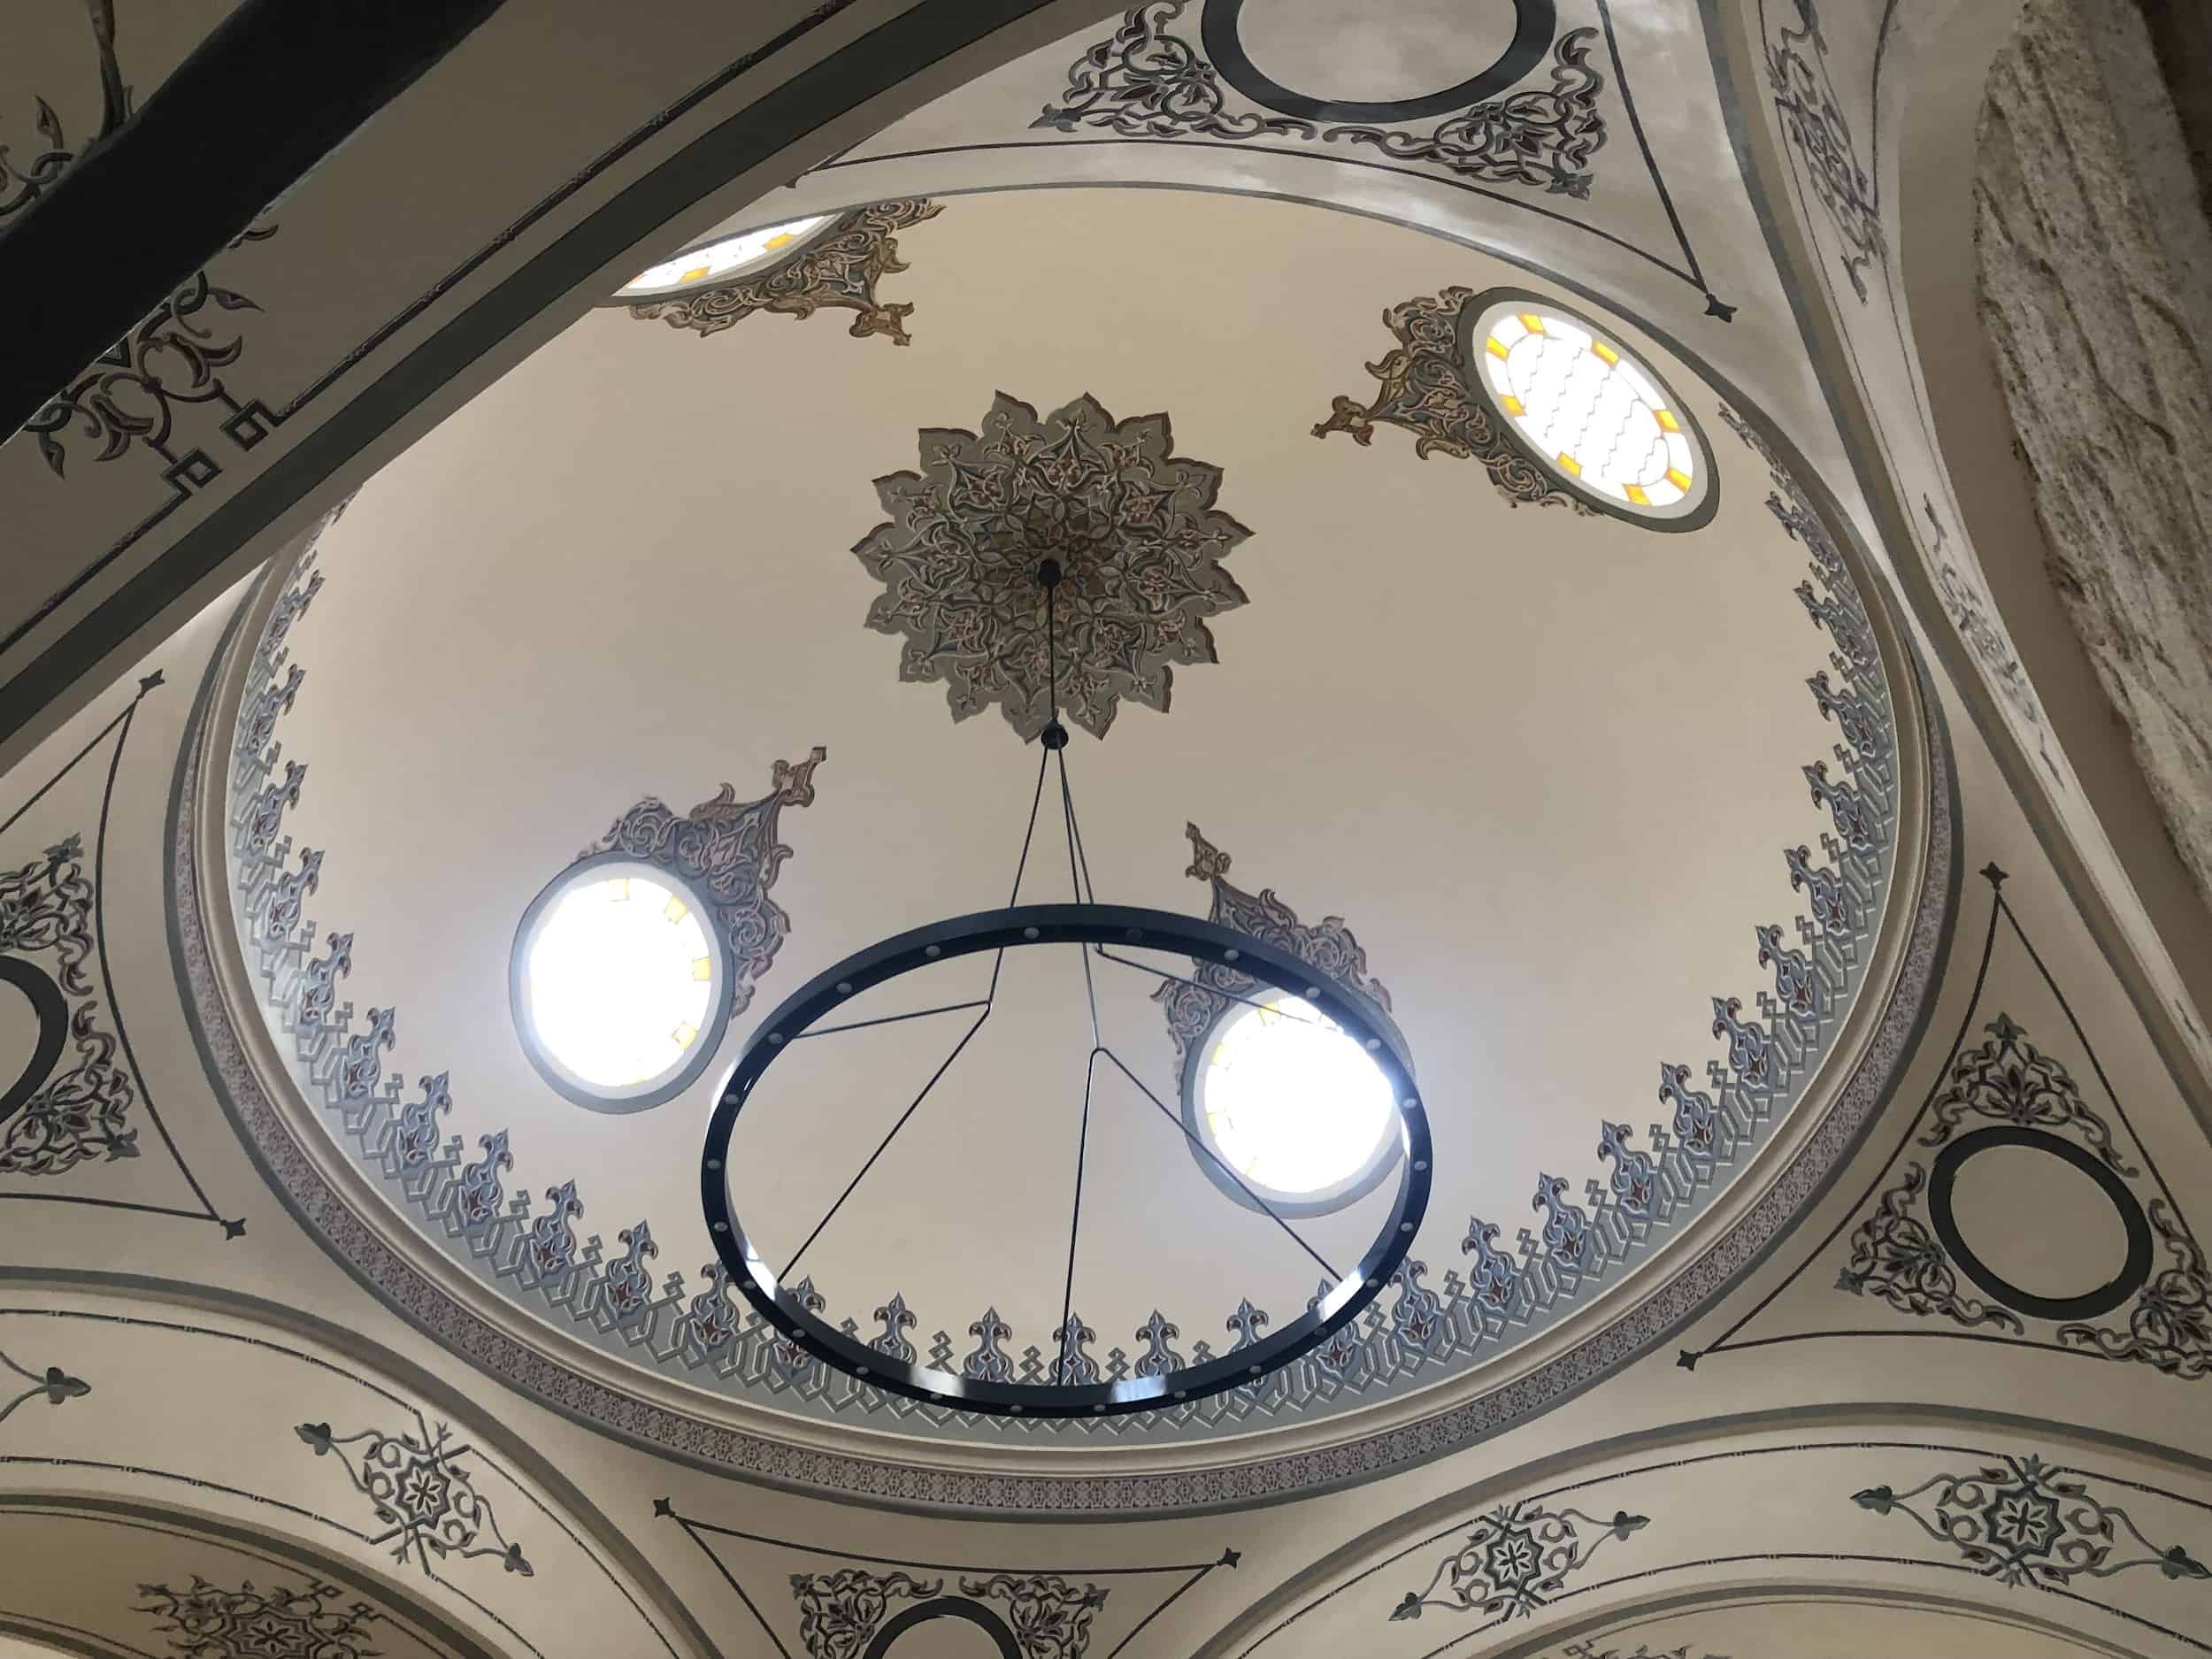 Dome of the Beyazıt State Library